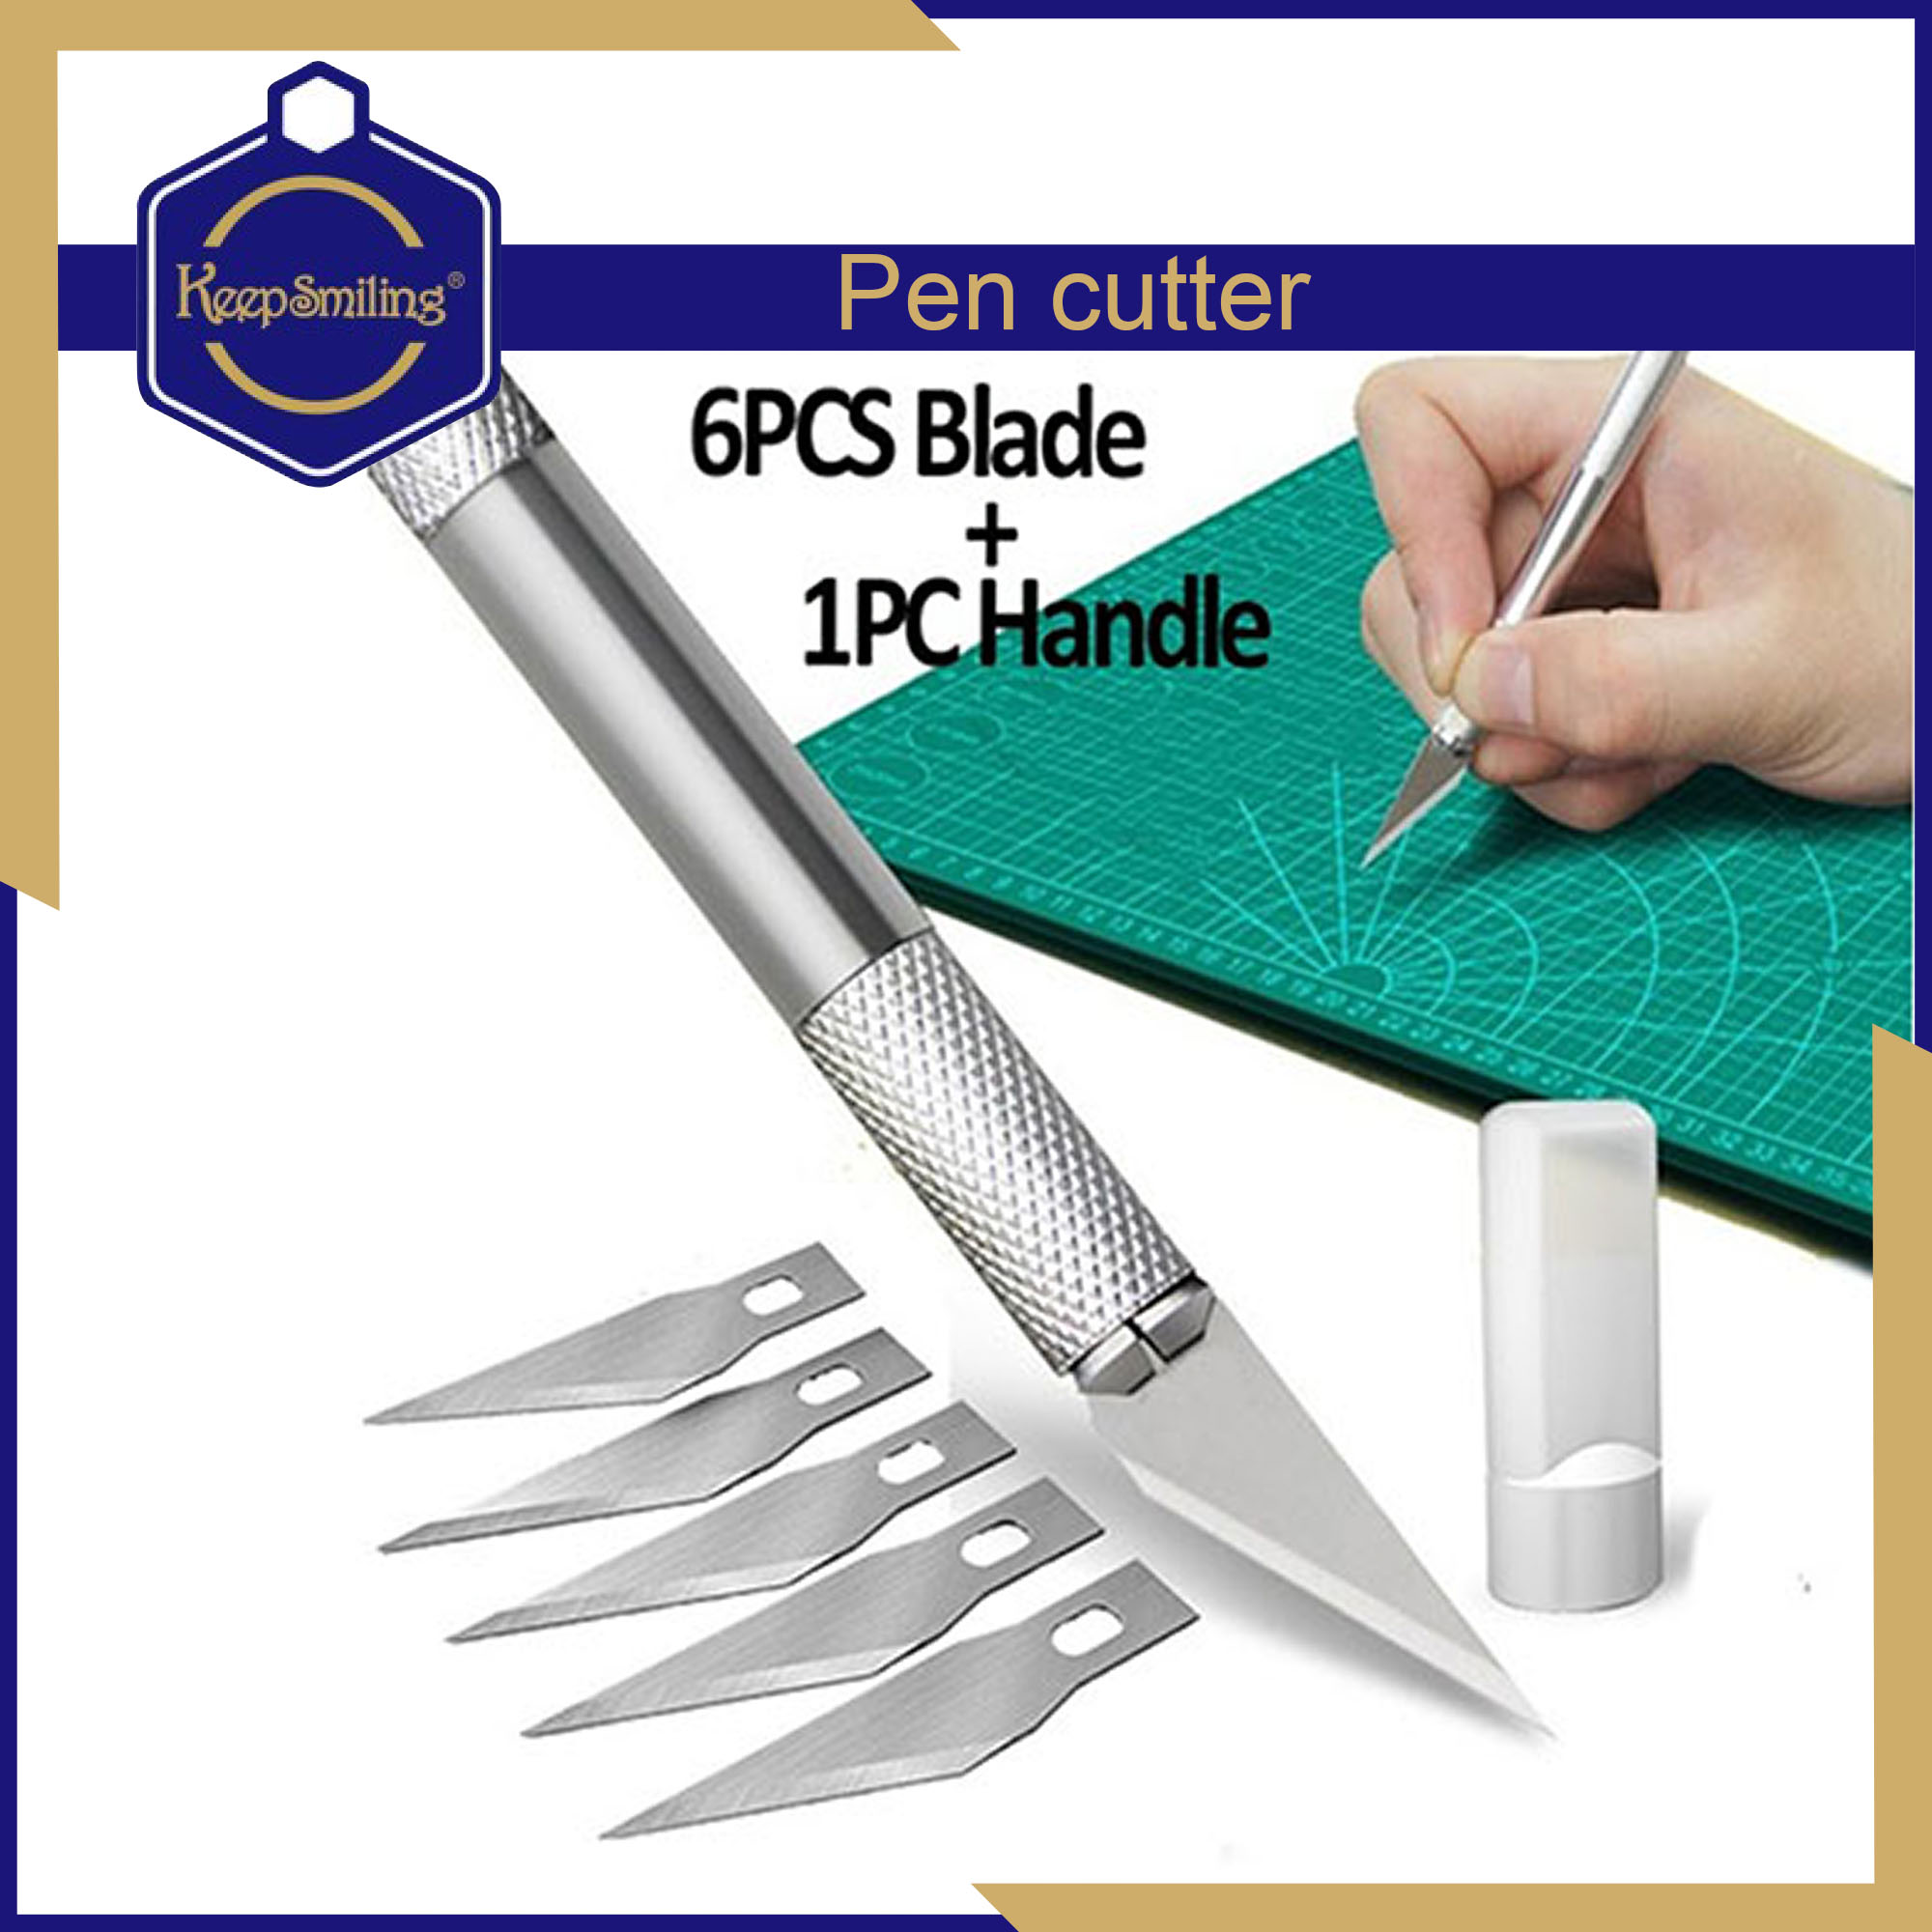 Keep Smiling Pen Type Paper Cutter Precision Cutter X-acto Knife For Artists Pen Knife Knives Metal Precision Paper Cutting Cutter Art Tool For Craft Set Model Making Carving Scoring Pen Type With 6 Blades For Diy Creator